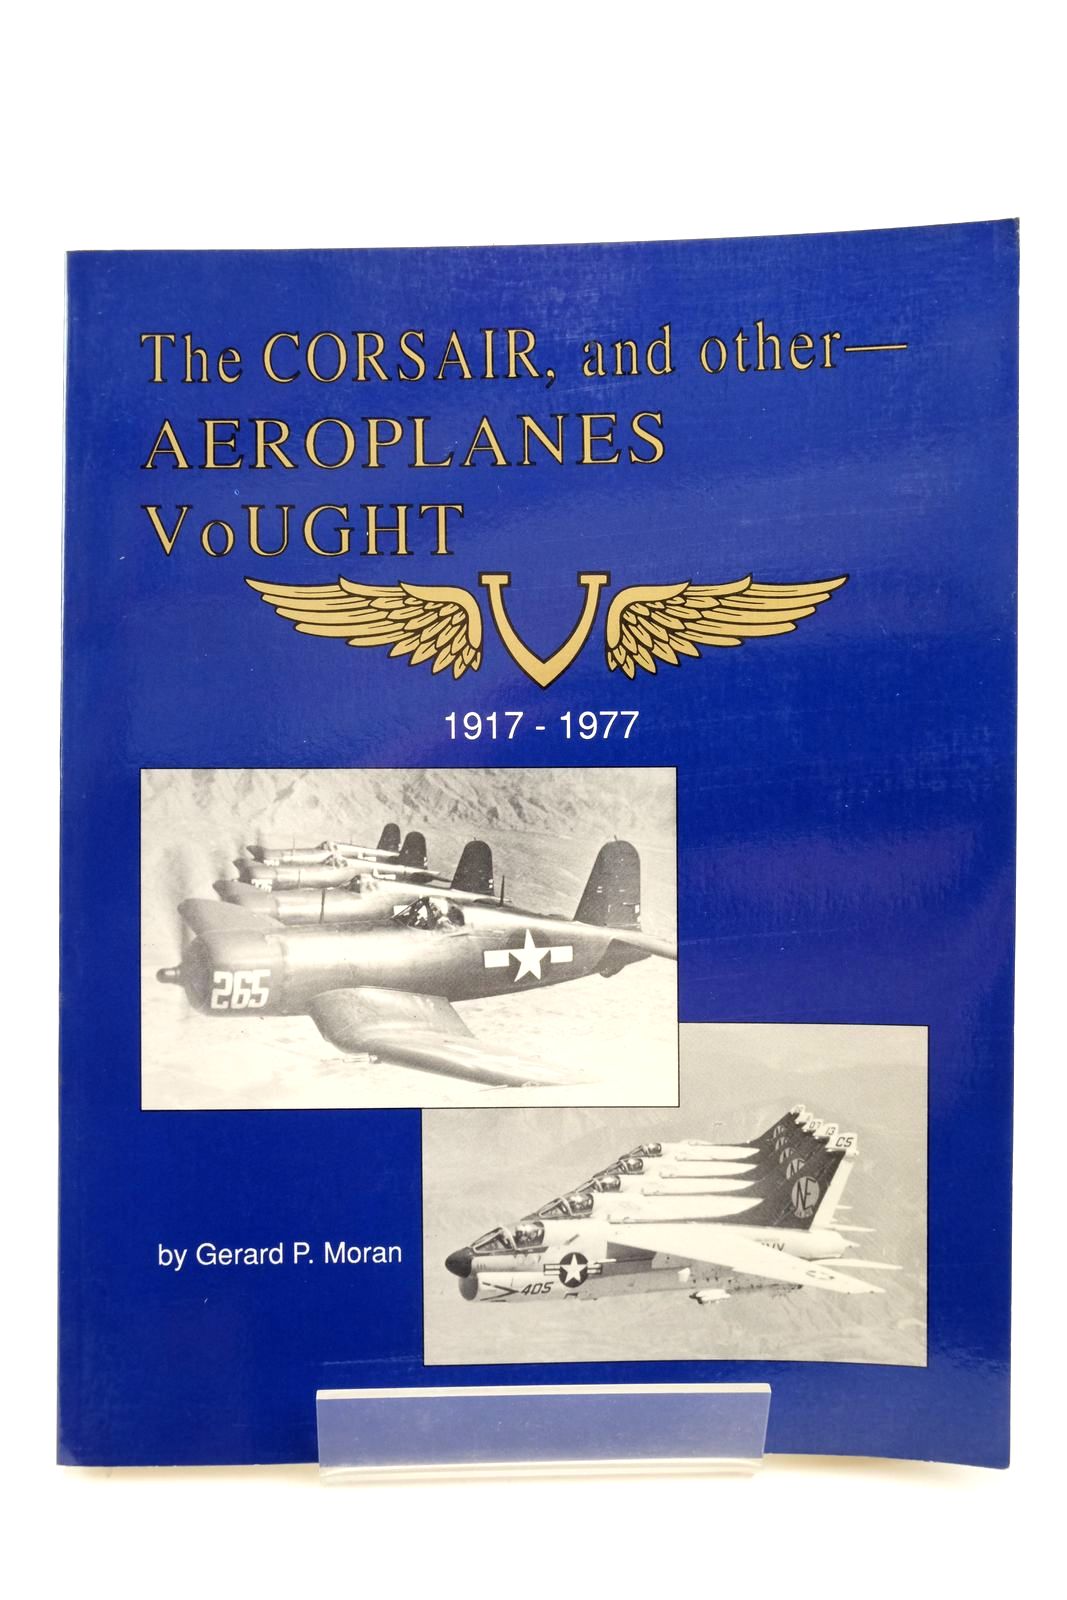 Photo of THE CORSAIR, AND OTHER AEROPLANES VOUGHT 1917-1977 written by Moran, Gerard P. published by Sunshine House, Inc. (STOCK CODE: 2138655)  for sale by Stella & Rose's Books